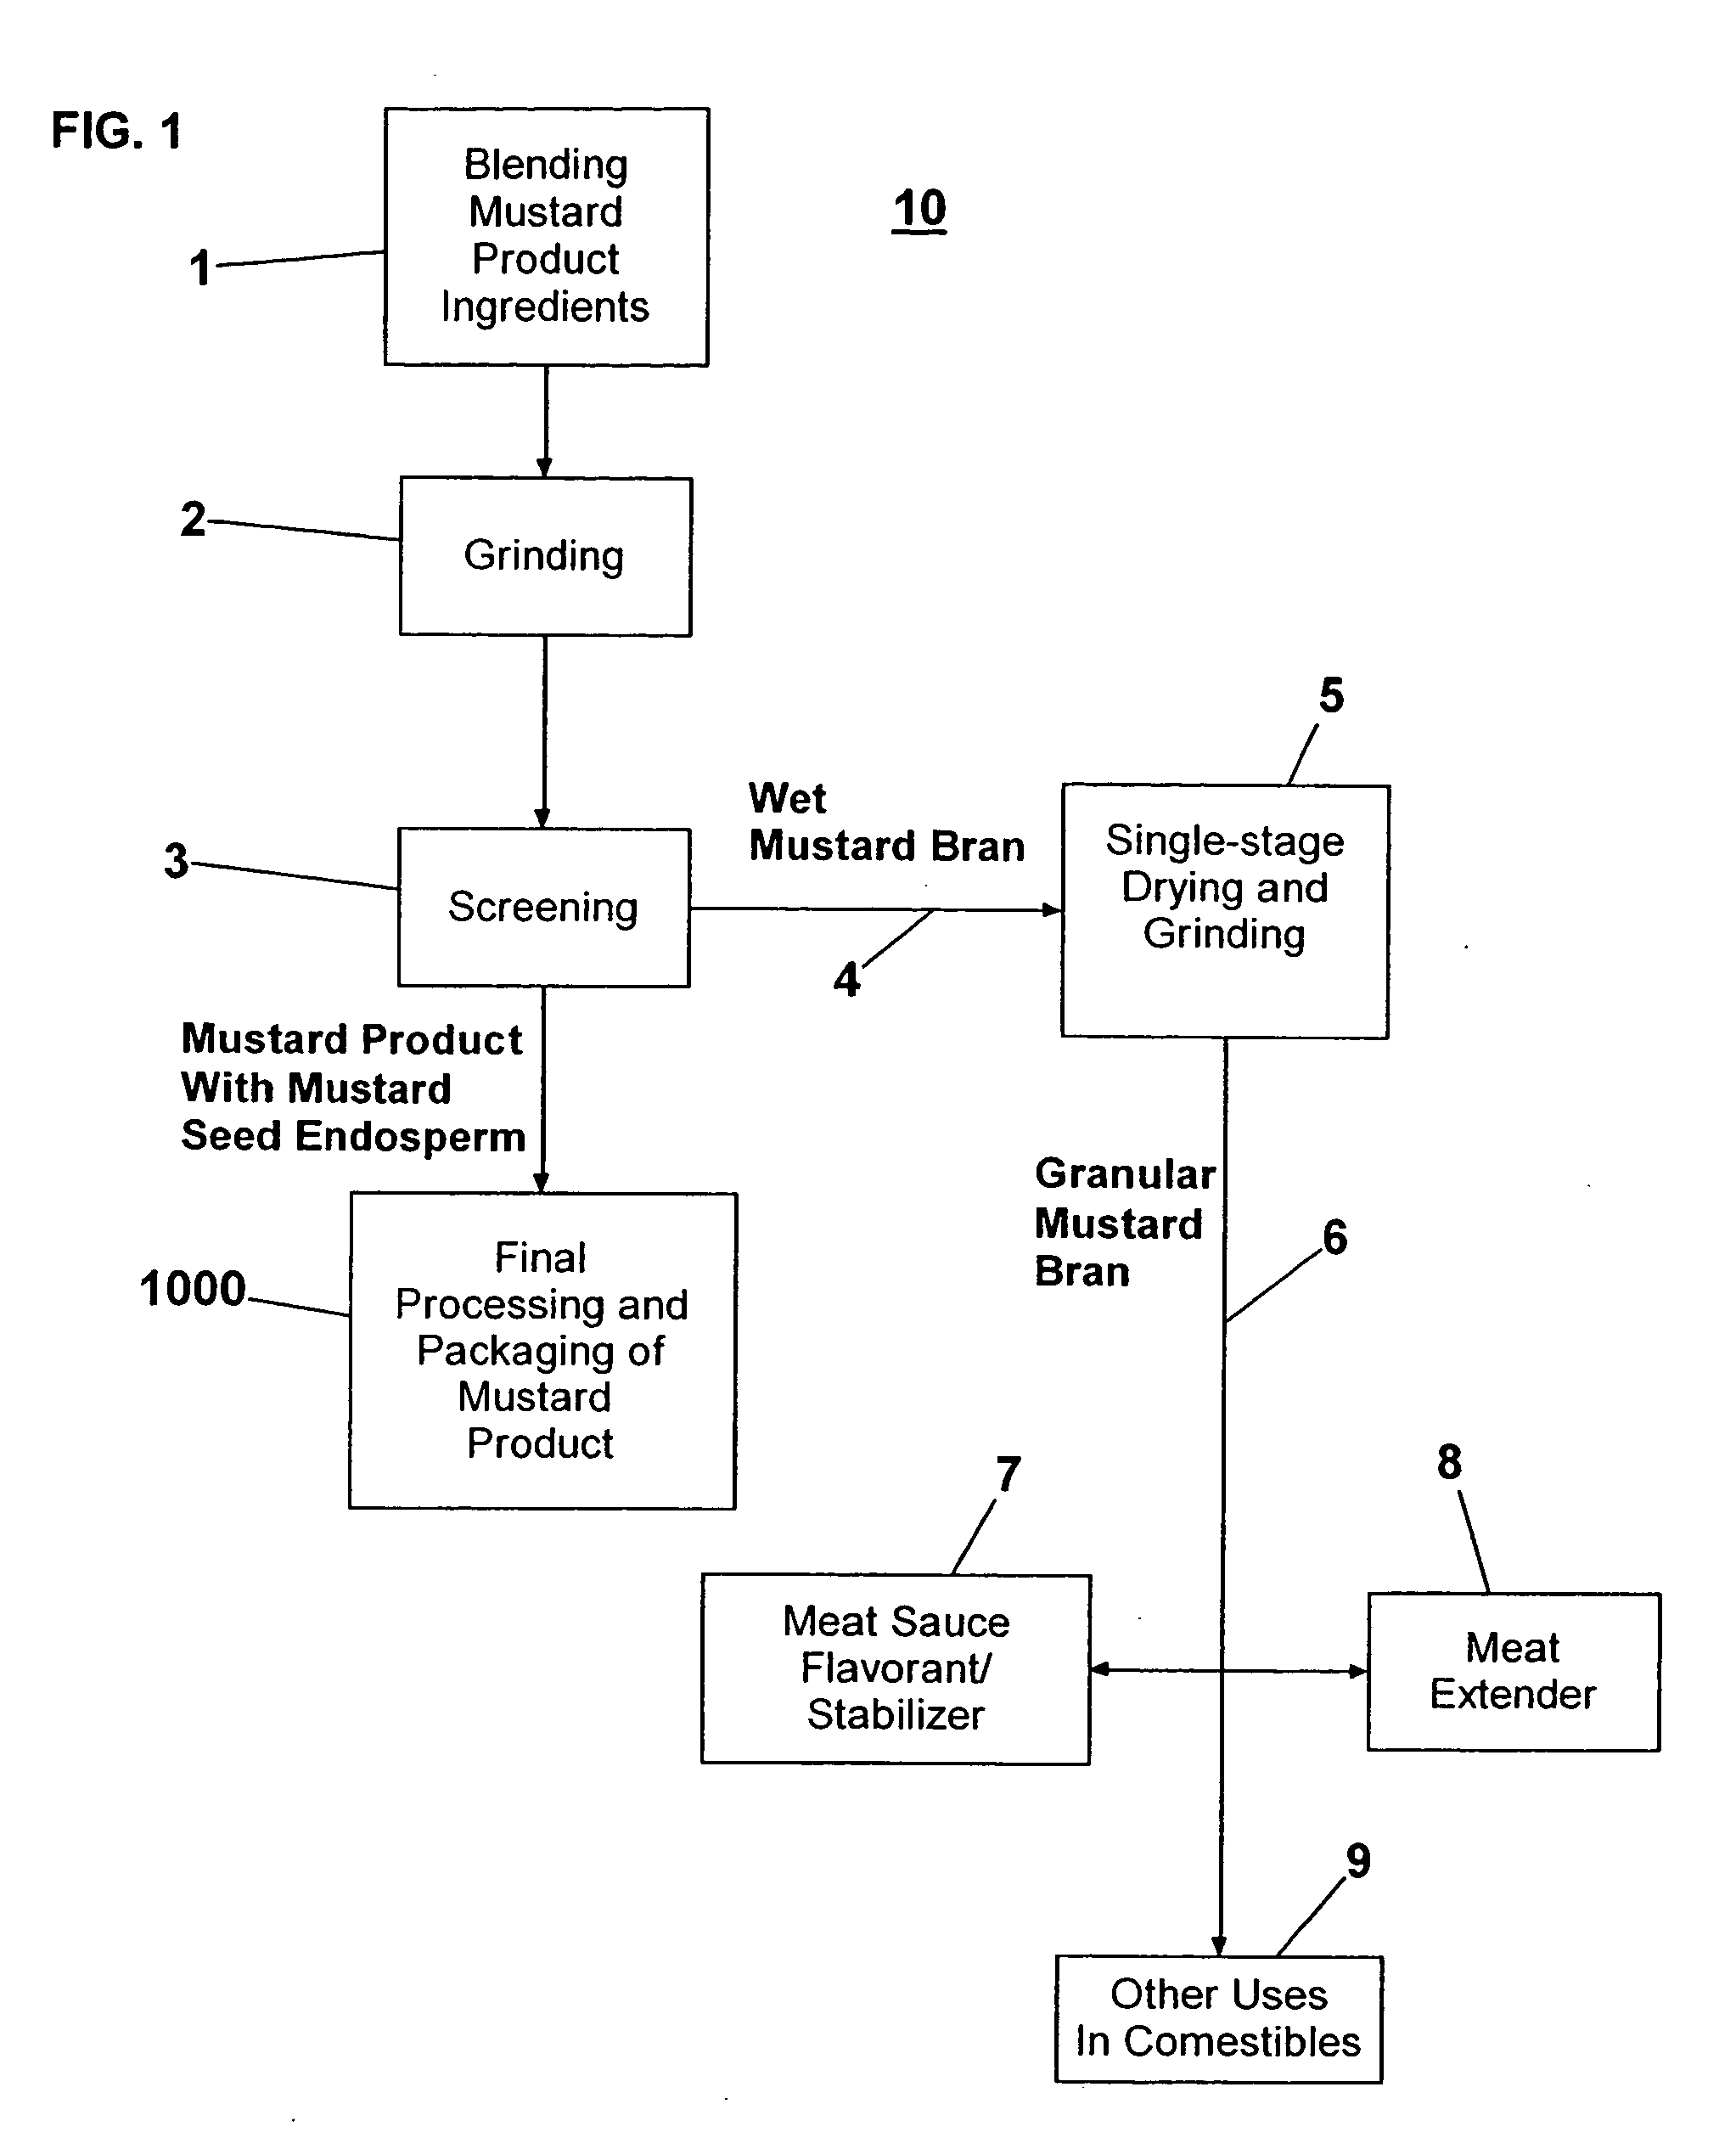 Process for single-stage heat treatment and grinding of mustard bran, and product and its uses